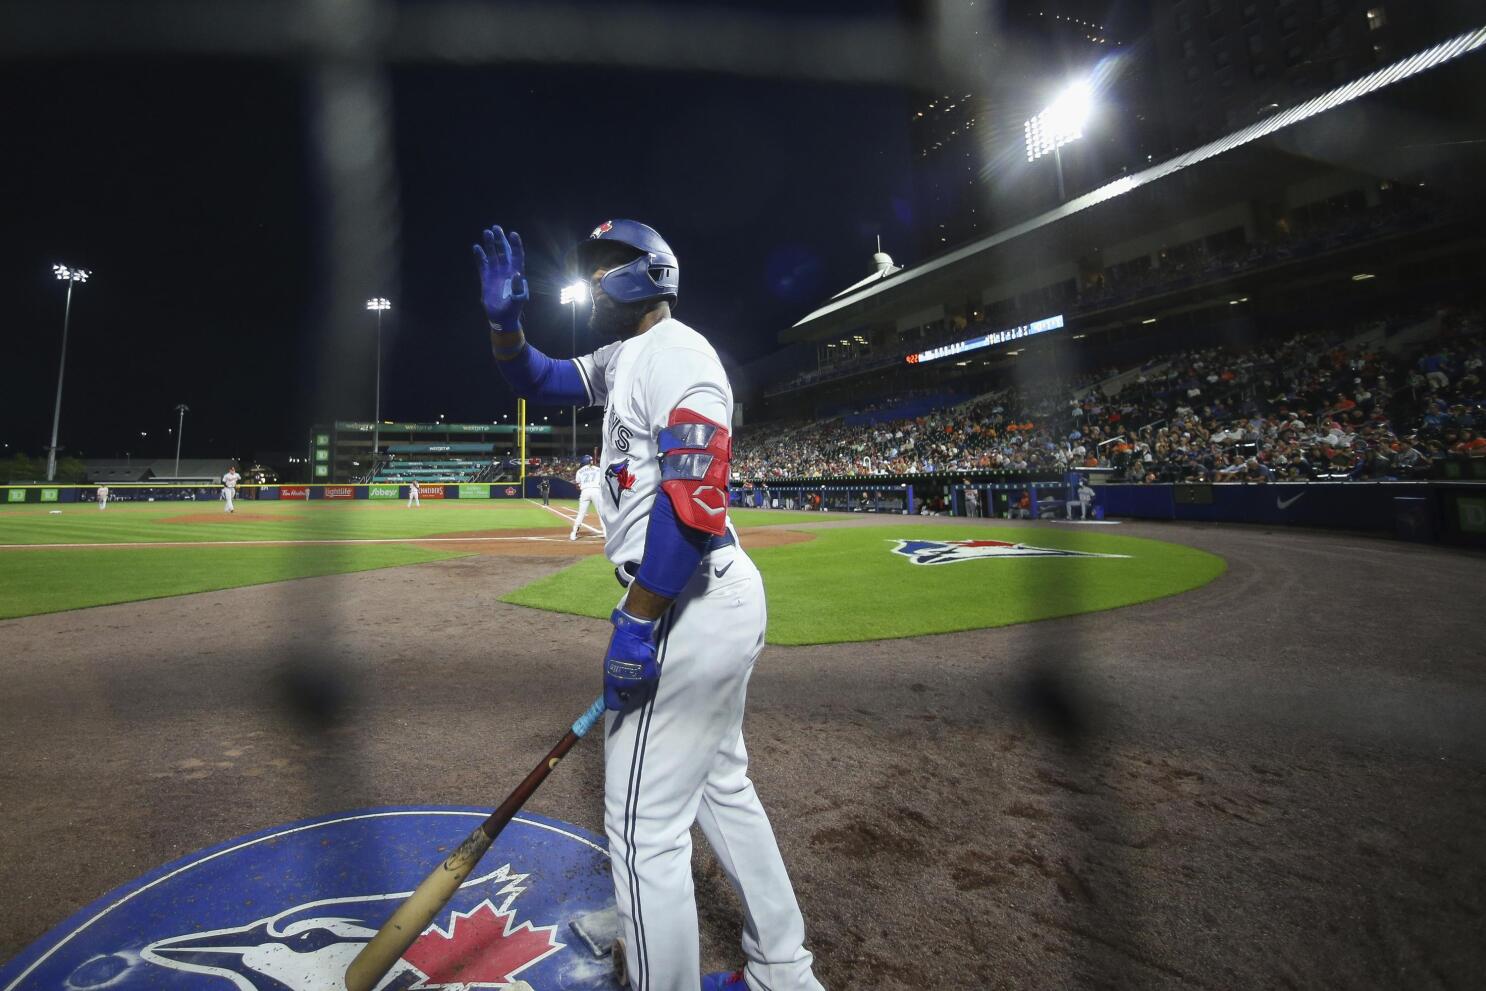 Toronto Blue Jays seeking exemption to play home games